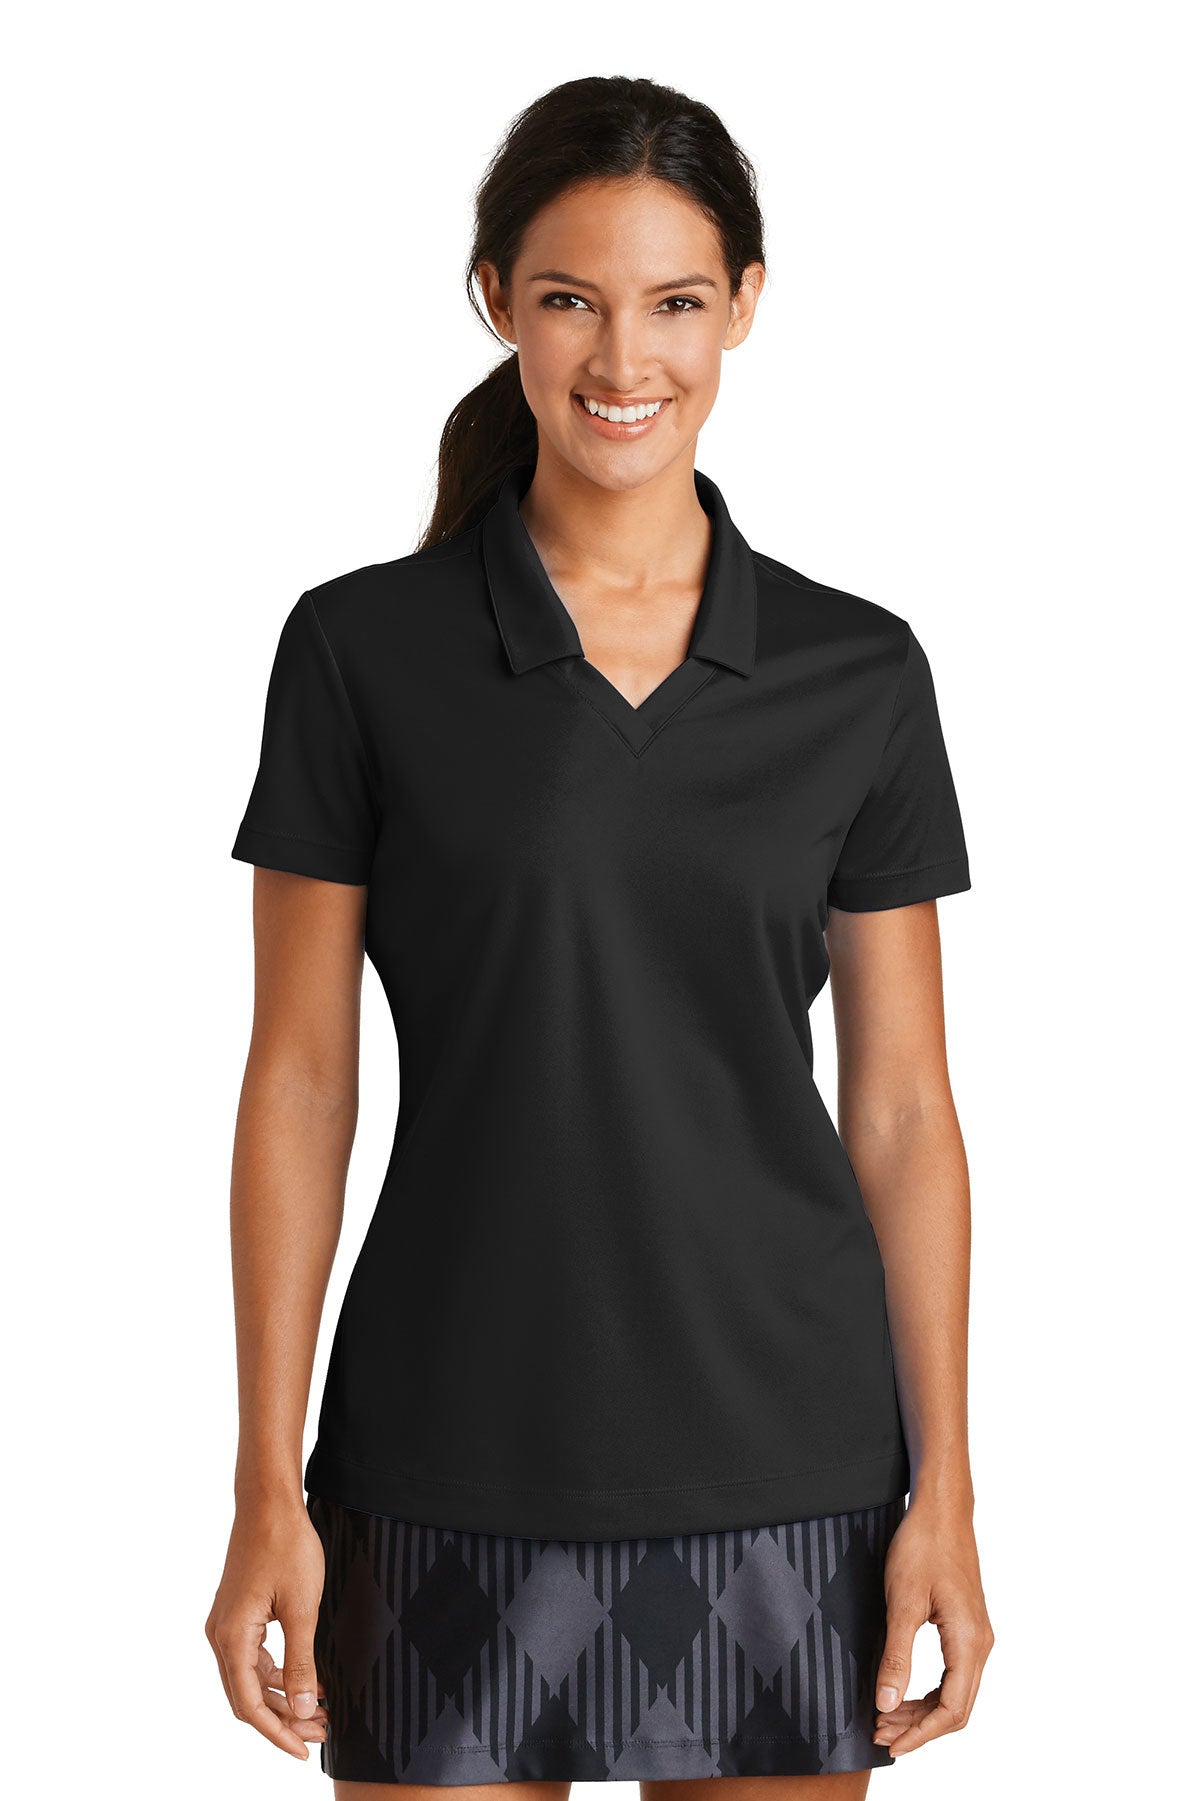 LL Sailboat (Embroidered) Nike Women's Golf Polo